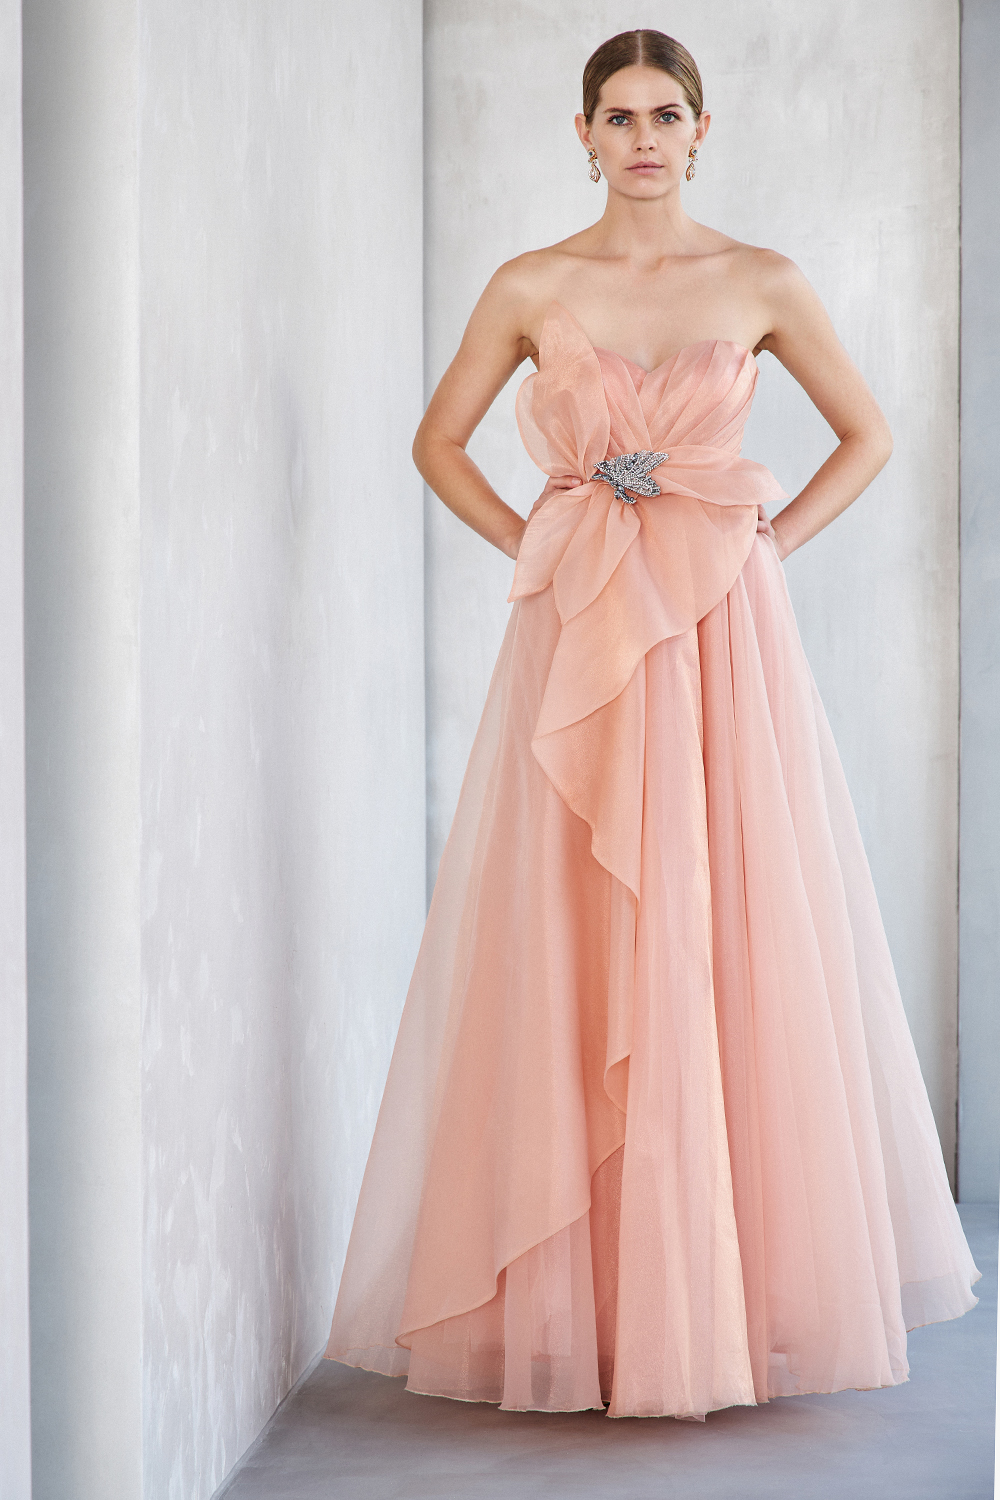 Вечерние платья / Long evening strapless dress with organza fabric and bow at the waist